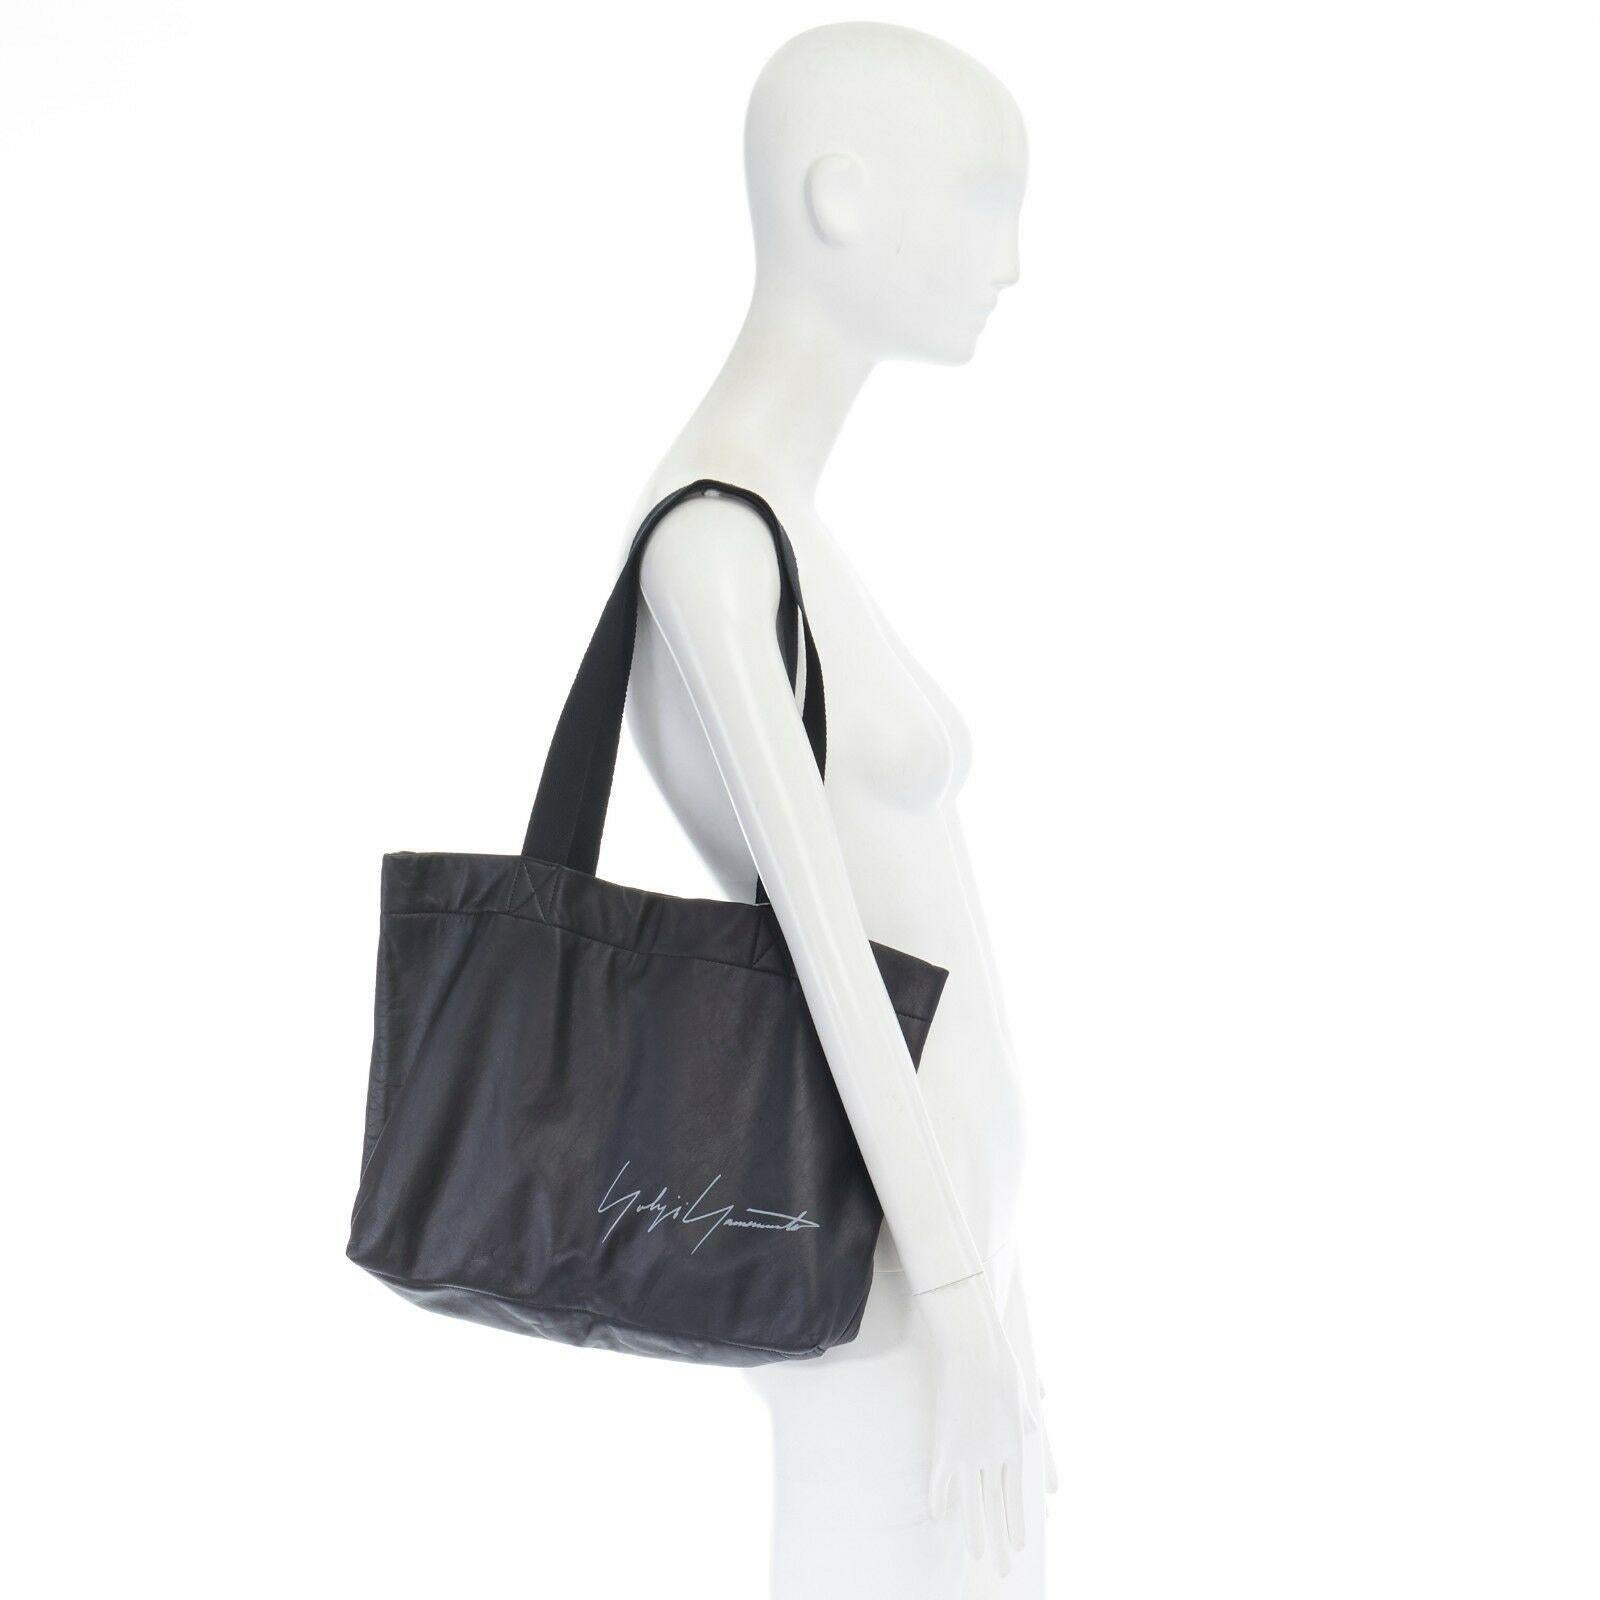 new YOHJI YAMAMOTO black leather white signature woven strap shoulder tote bag
YOHJI YAMAMOTO
Black genuine leather tote. 
White signature printed at front face. 
Tonal stitching. 
Black woven shoulder dual top flat handle straps. 
Fully lined in